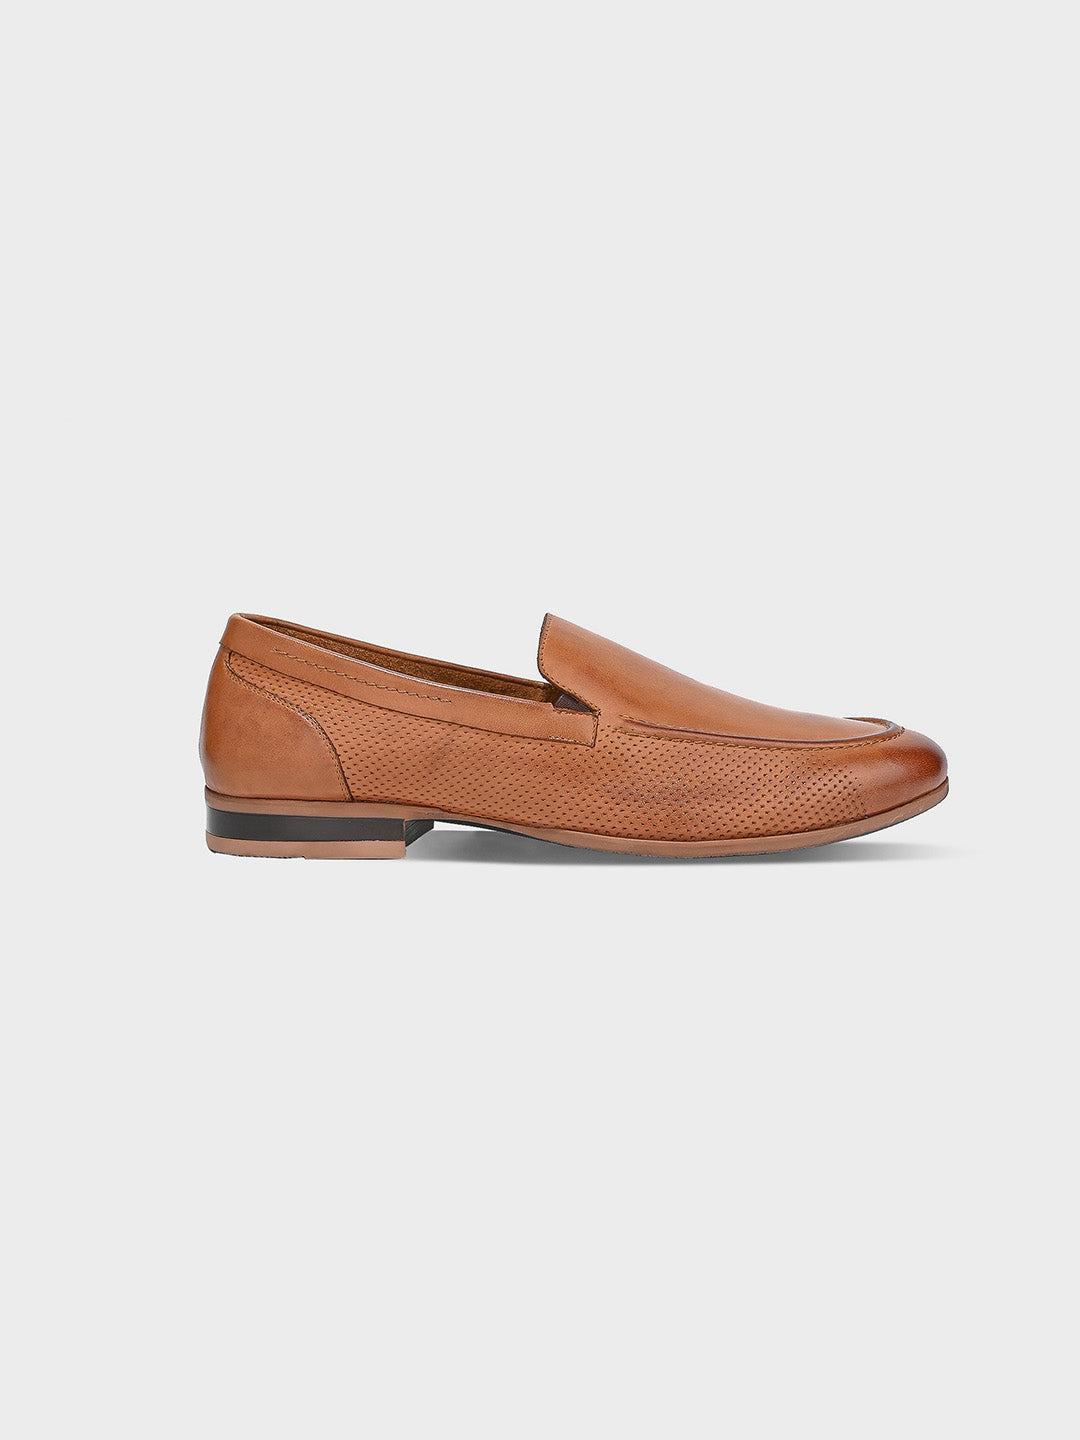 Classic Tan Leather Slip-On Loafer Shoes for Men